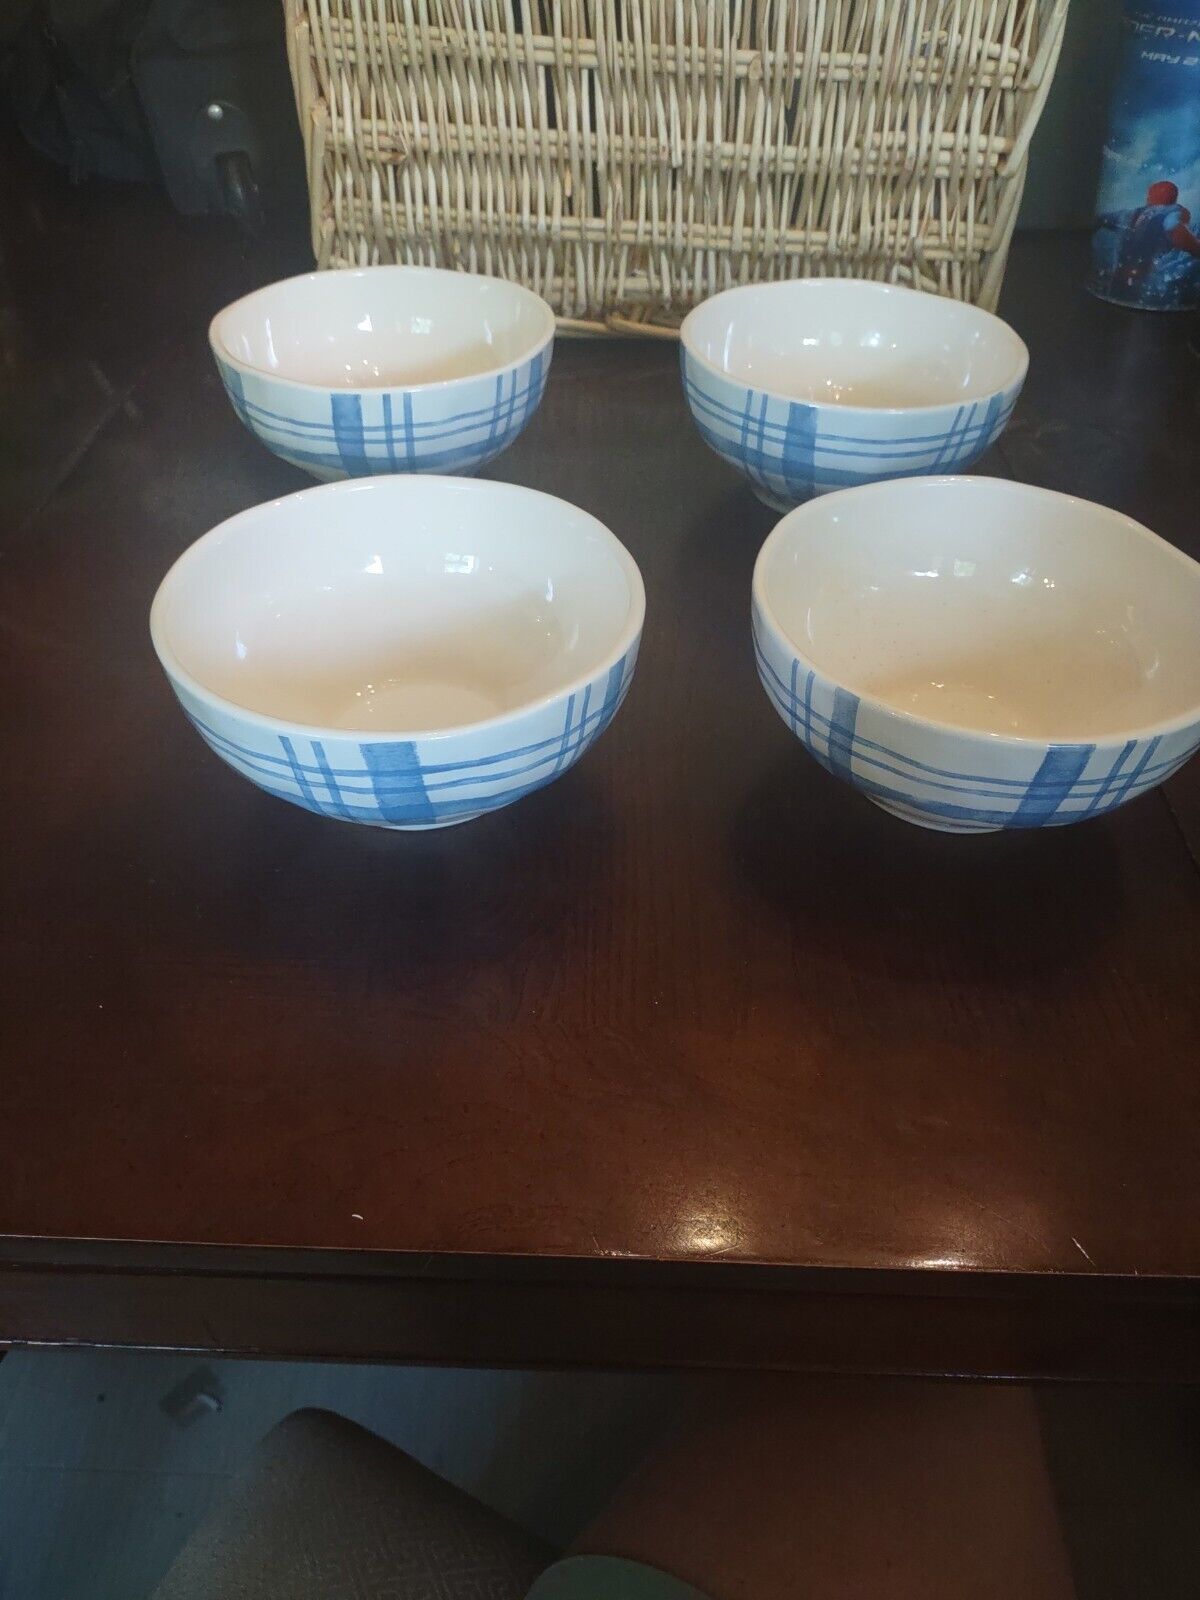 Set Of 4 Pier 1 Blue Striped/White Cereal/Soup Bowls-Brand New-RARE-SHIP N 24HRS - $79.08